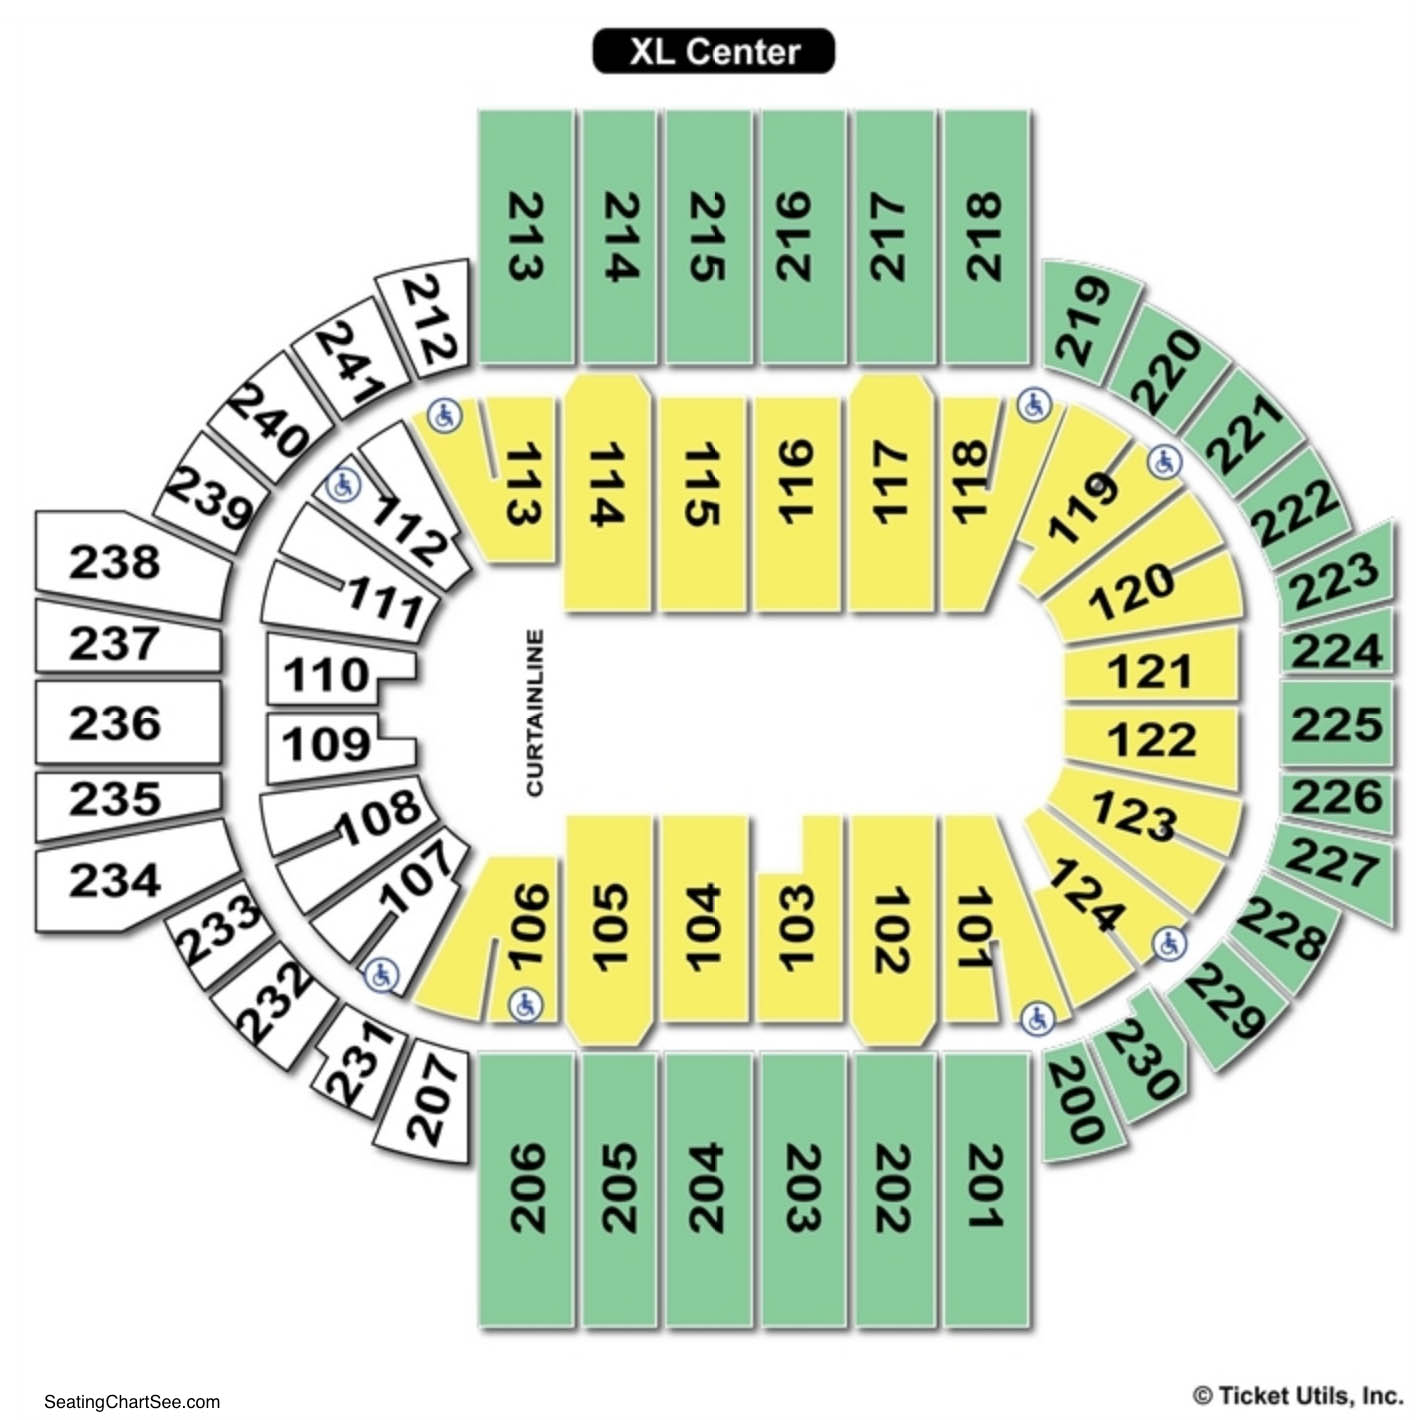 Overture Center Seating Chart Detailed - Overture Center Overture Hall Seat...